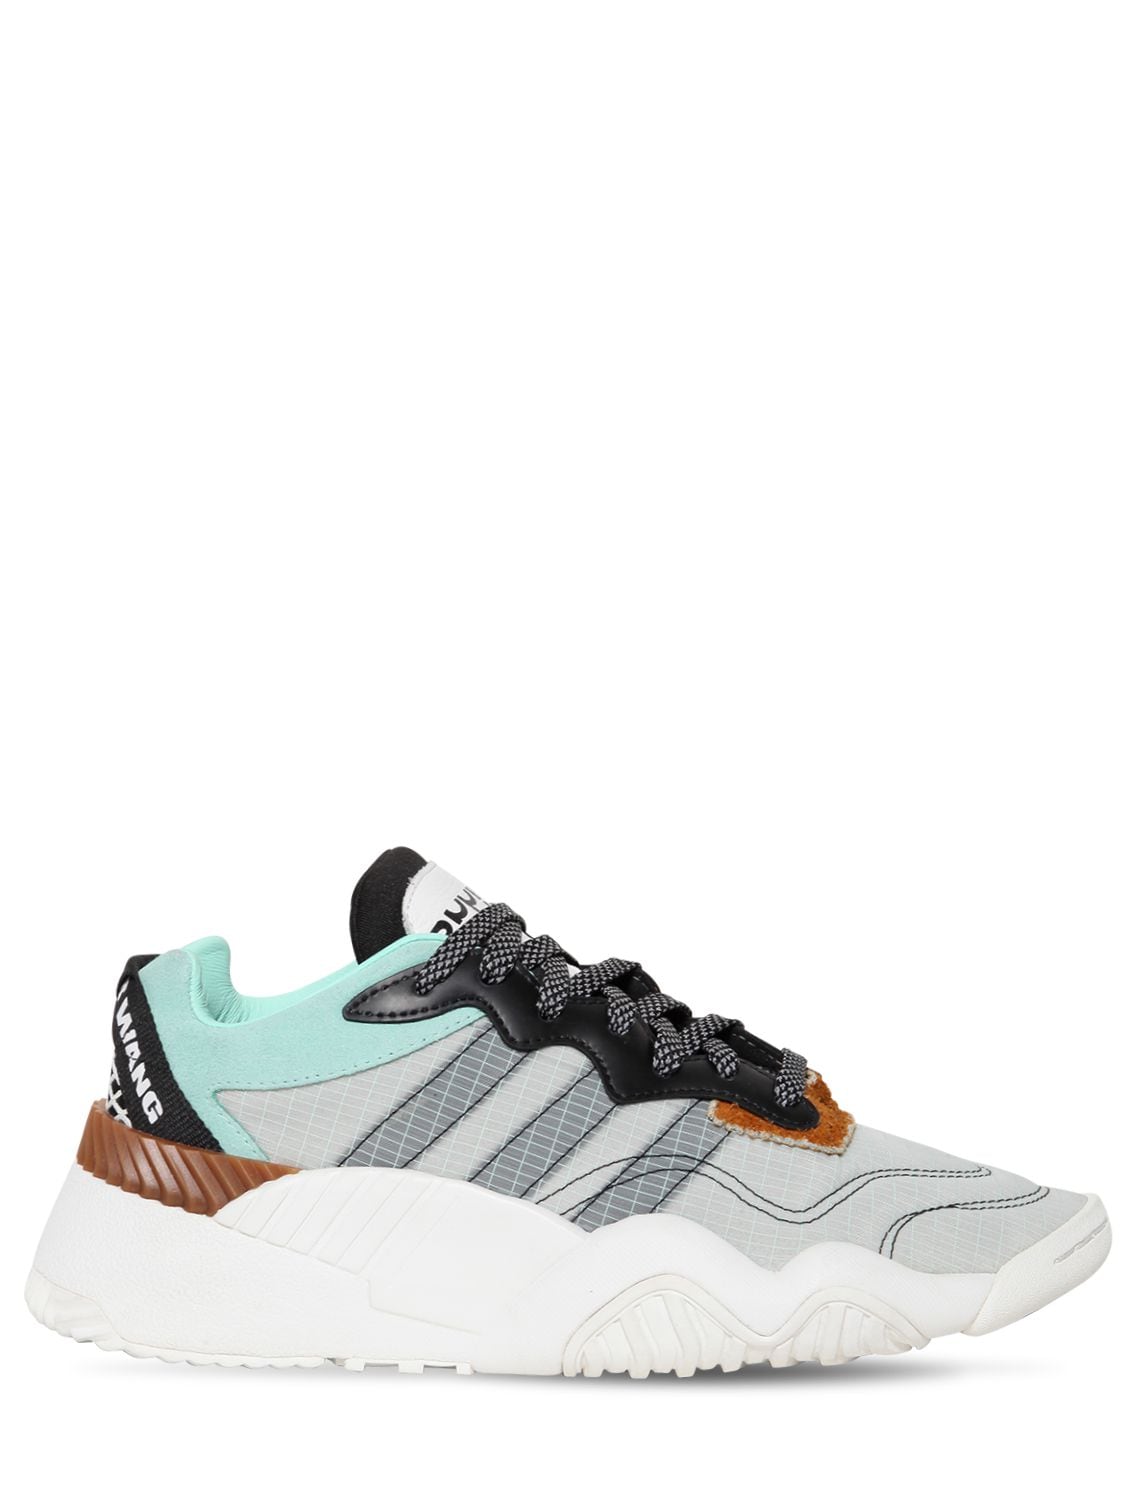 adidas originals by alexander wang aw turnout sneakers